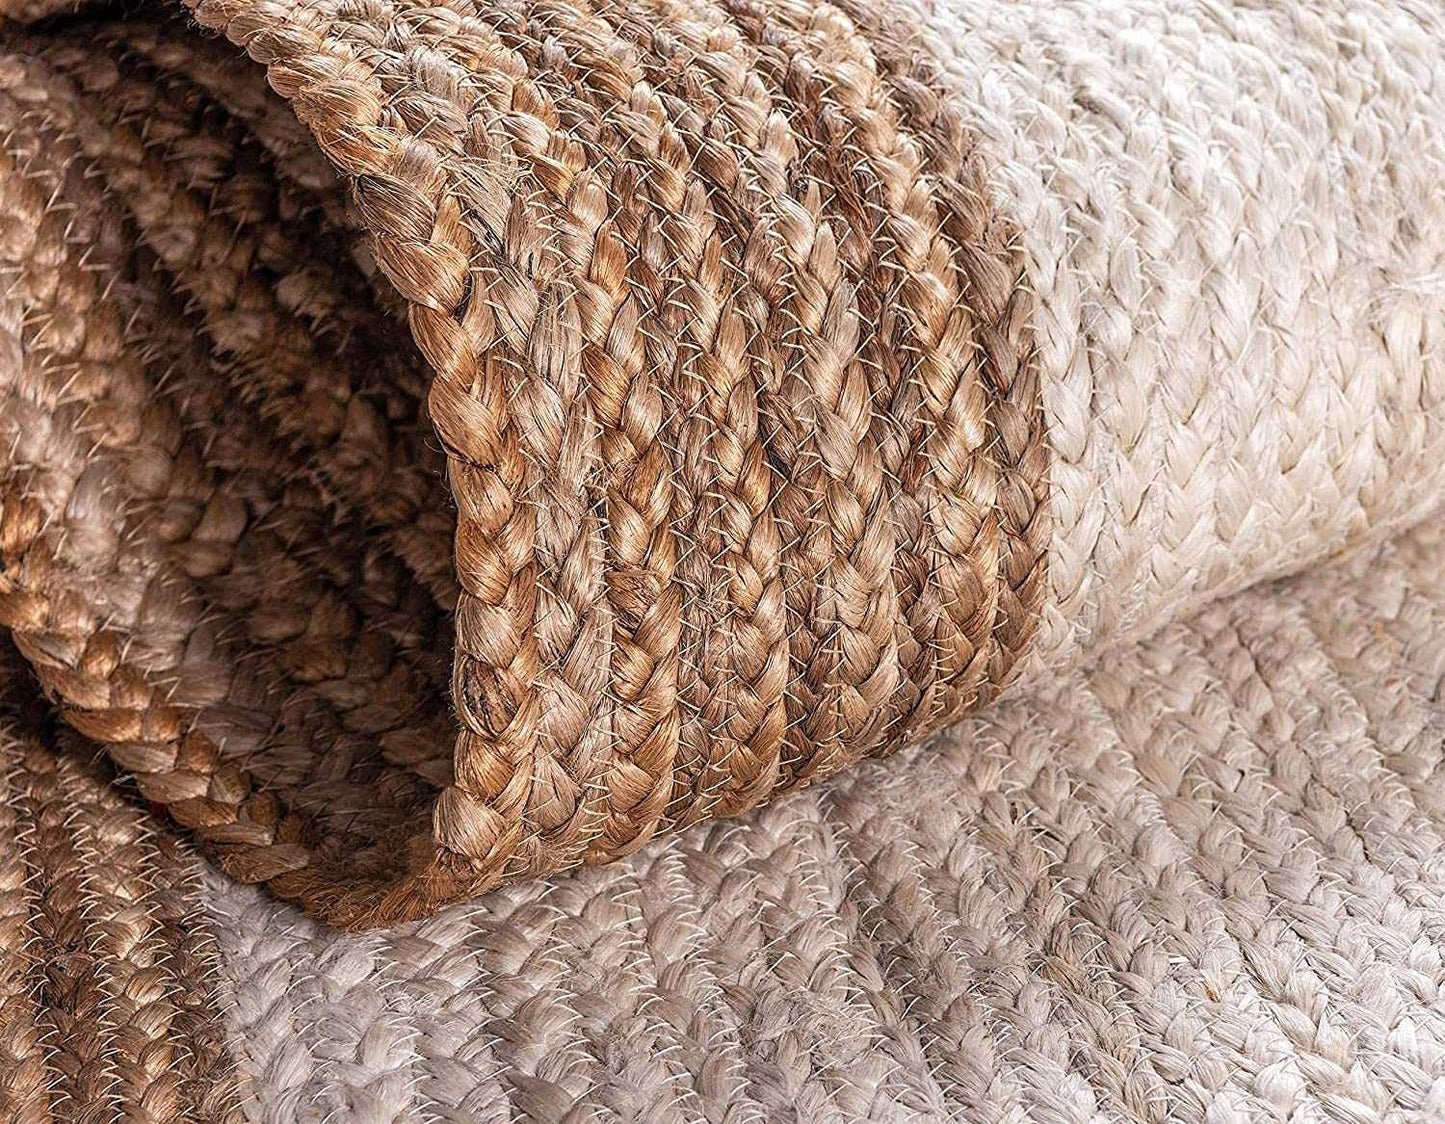 Natural Jute Braided Area Rugs